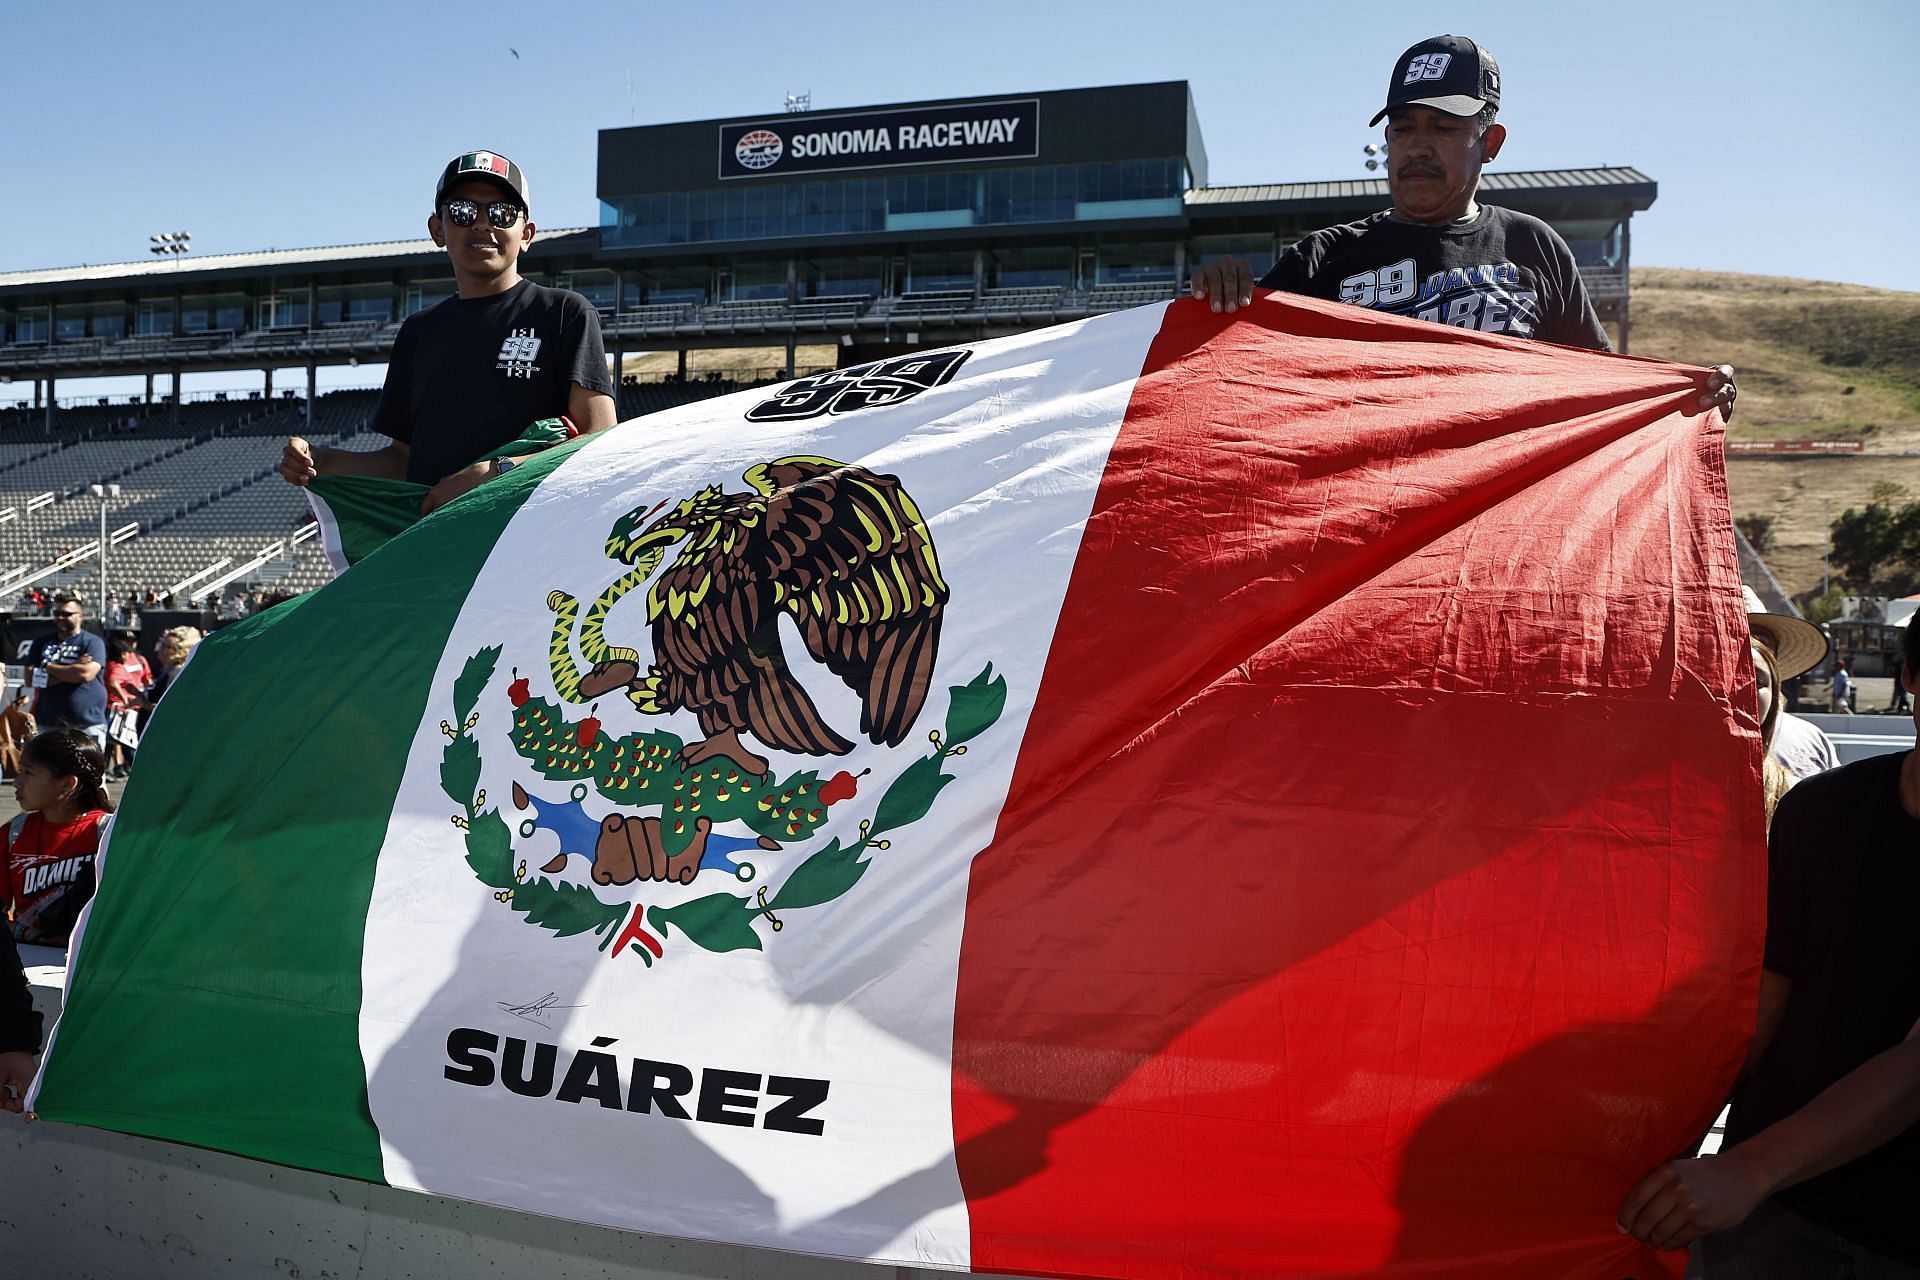 Fans of Daniel Suarez display a Mexican flag after the driver won the 2022 NASCAR Cup Series Toyota/Save Mart 350 at Sonoma Raceway in Sonoma, California (Photo by Chris Graythen/Getty Images)